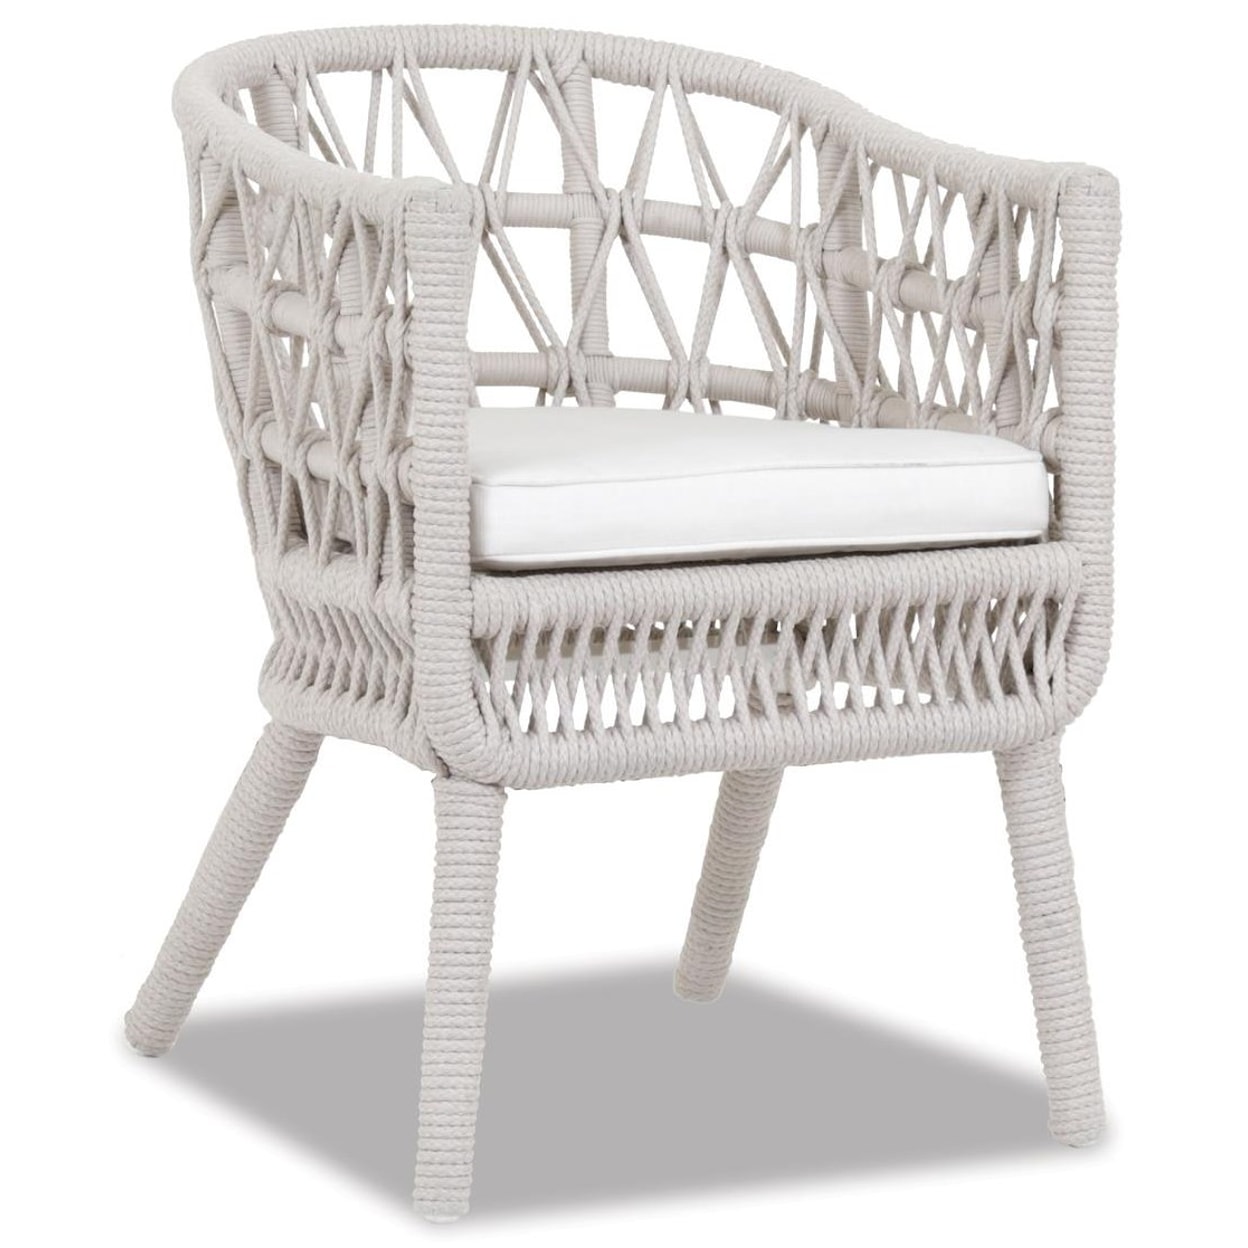 Sunset West Dana Rope Dining Chair